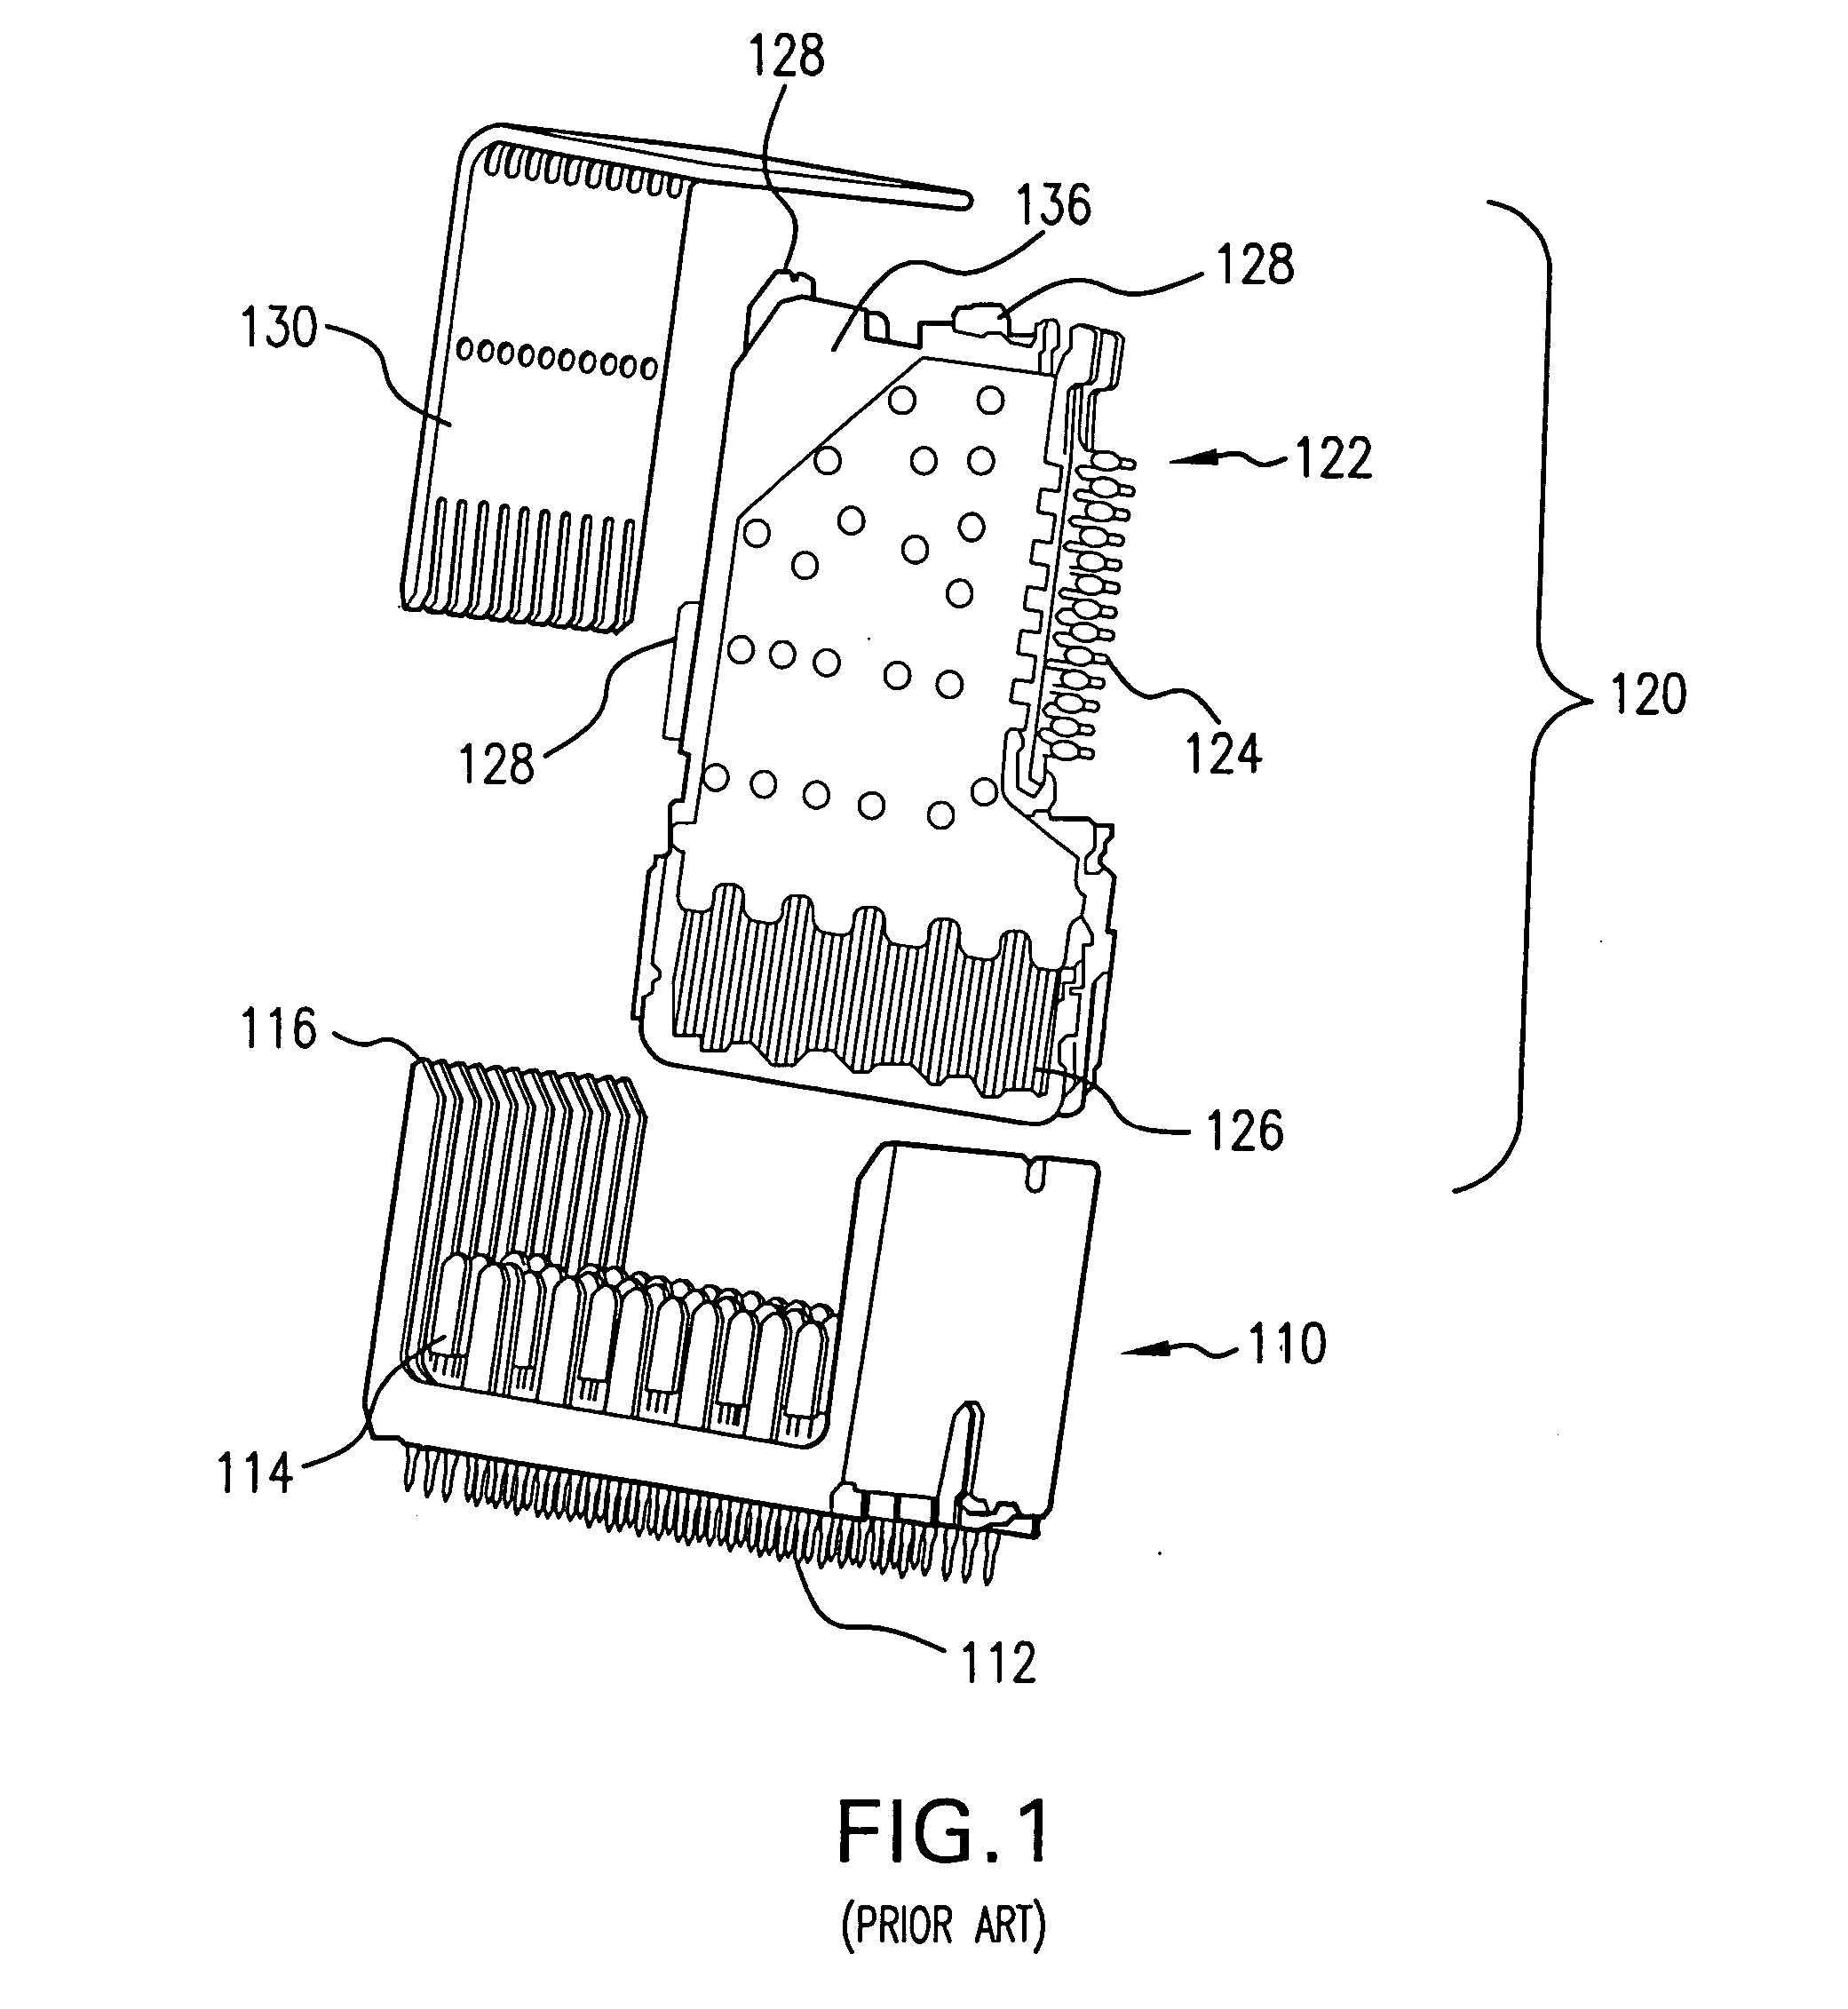 Electrical connector for interconnection assembly